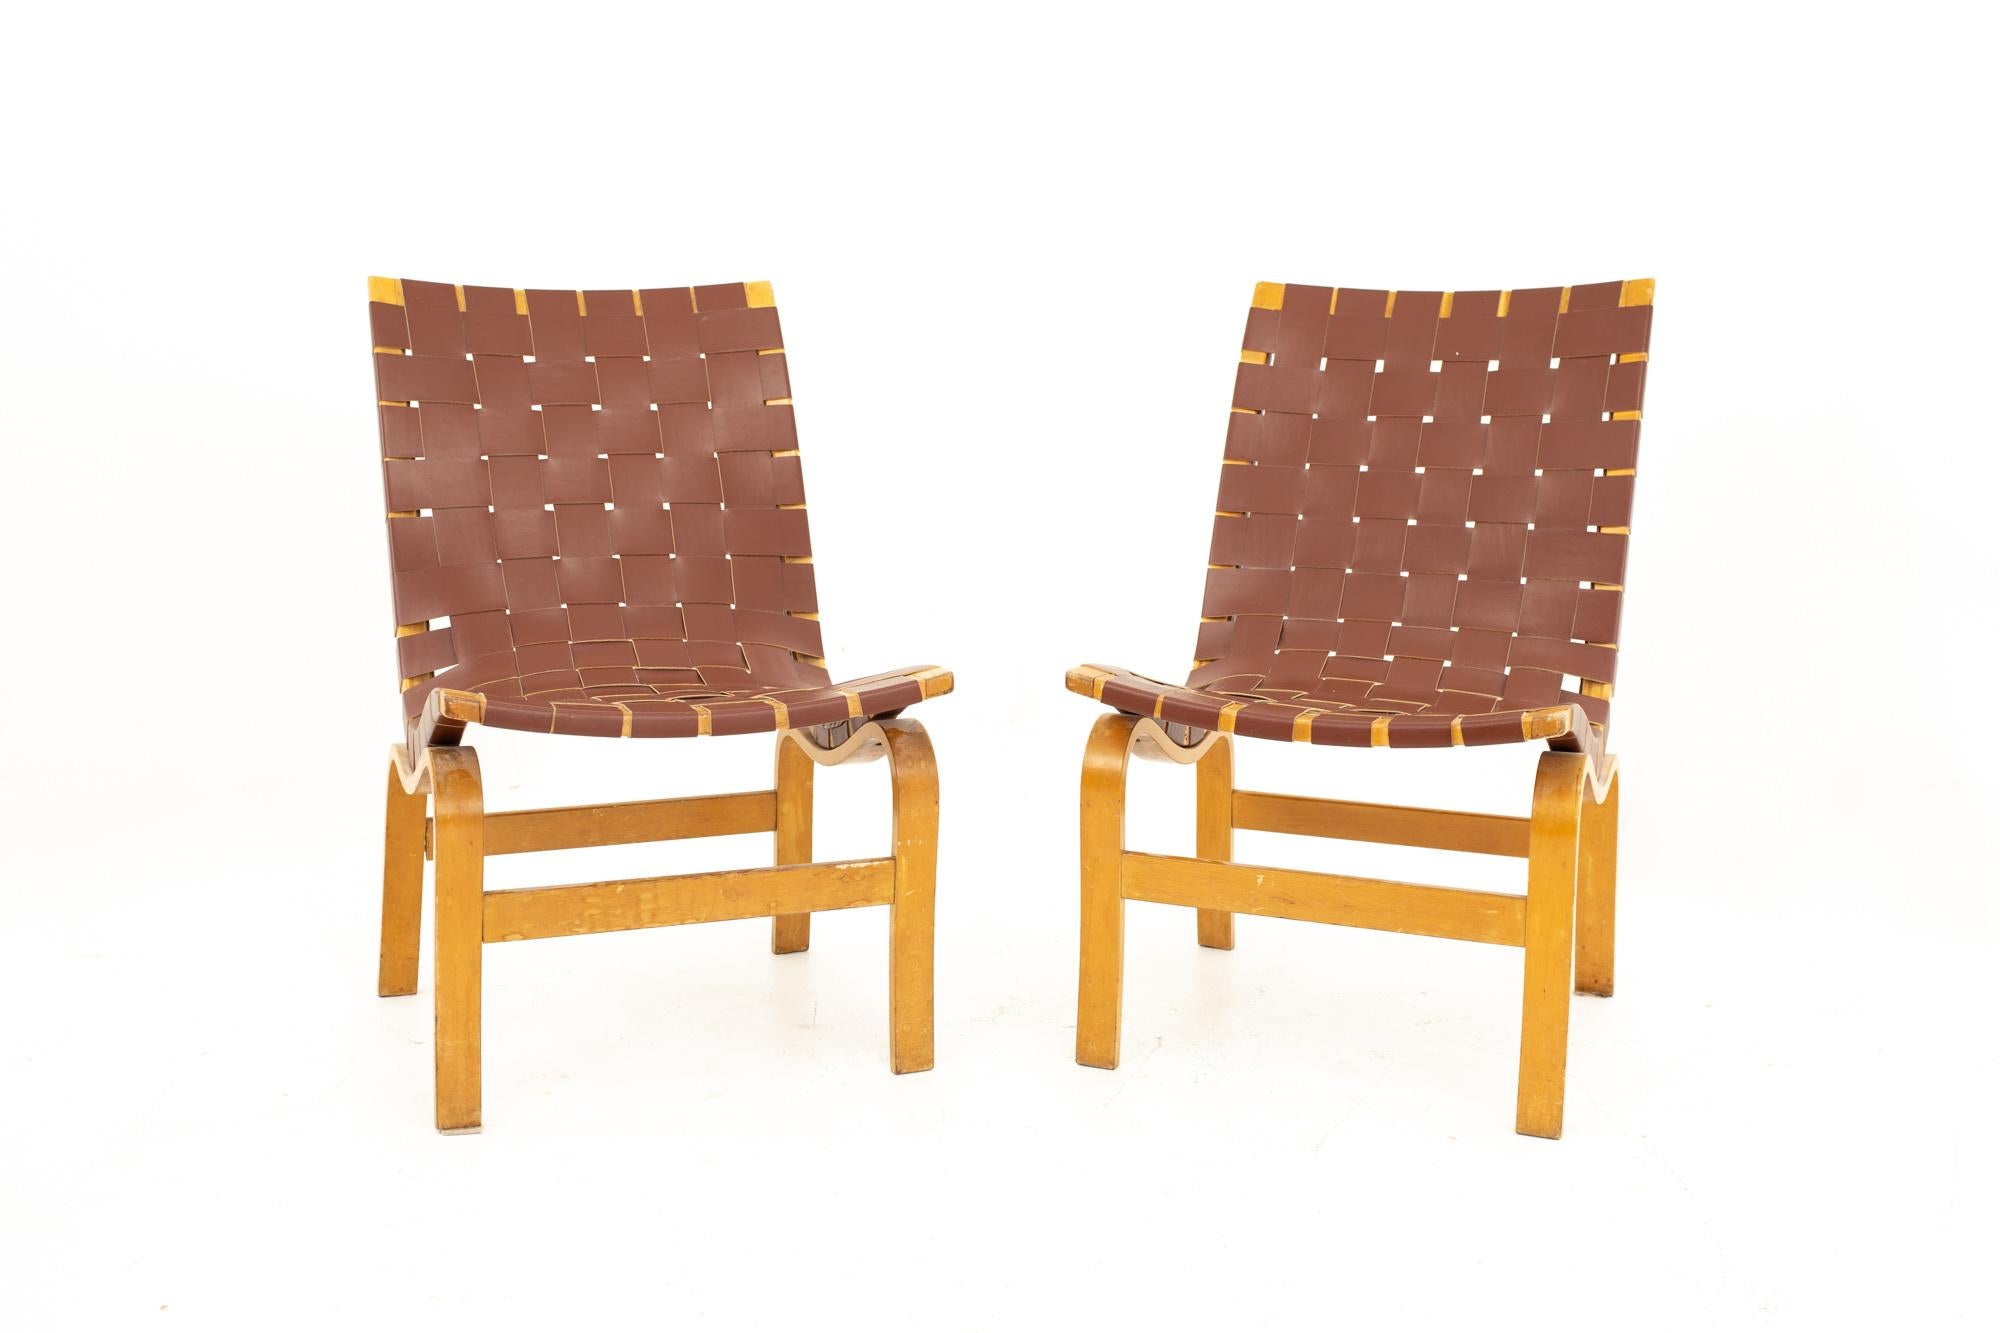 Bruno Mathsson Model 41 Eva Mid Century lounge chairs, pair
Each chair measures: 16.5 wide x 27 deep x 32 high with seat height of 17.5 inches

All pieces of furniture can be had in what we call restored vintage condition. This means the piece is